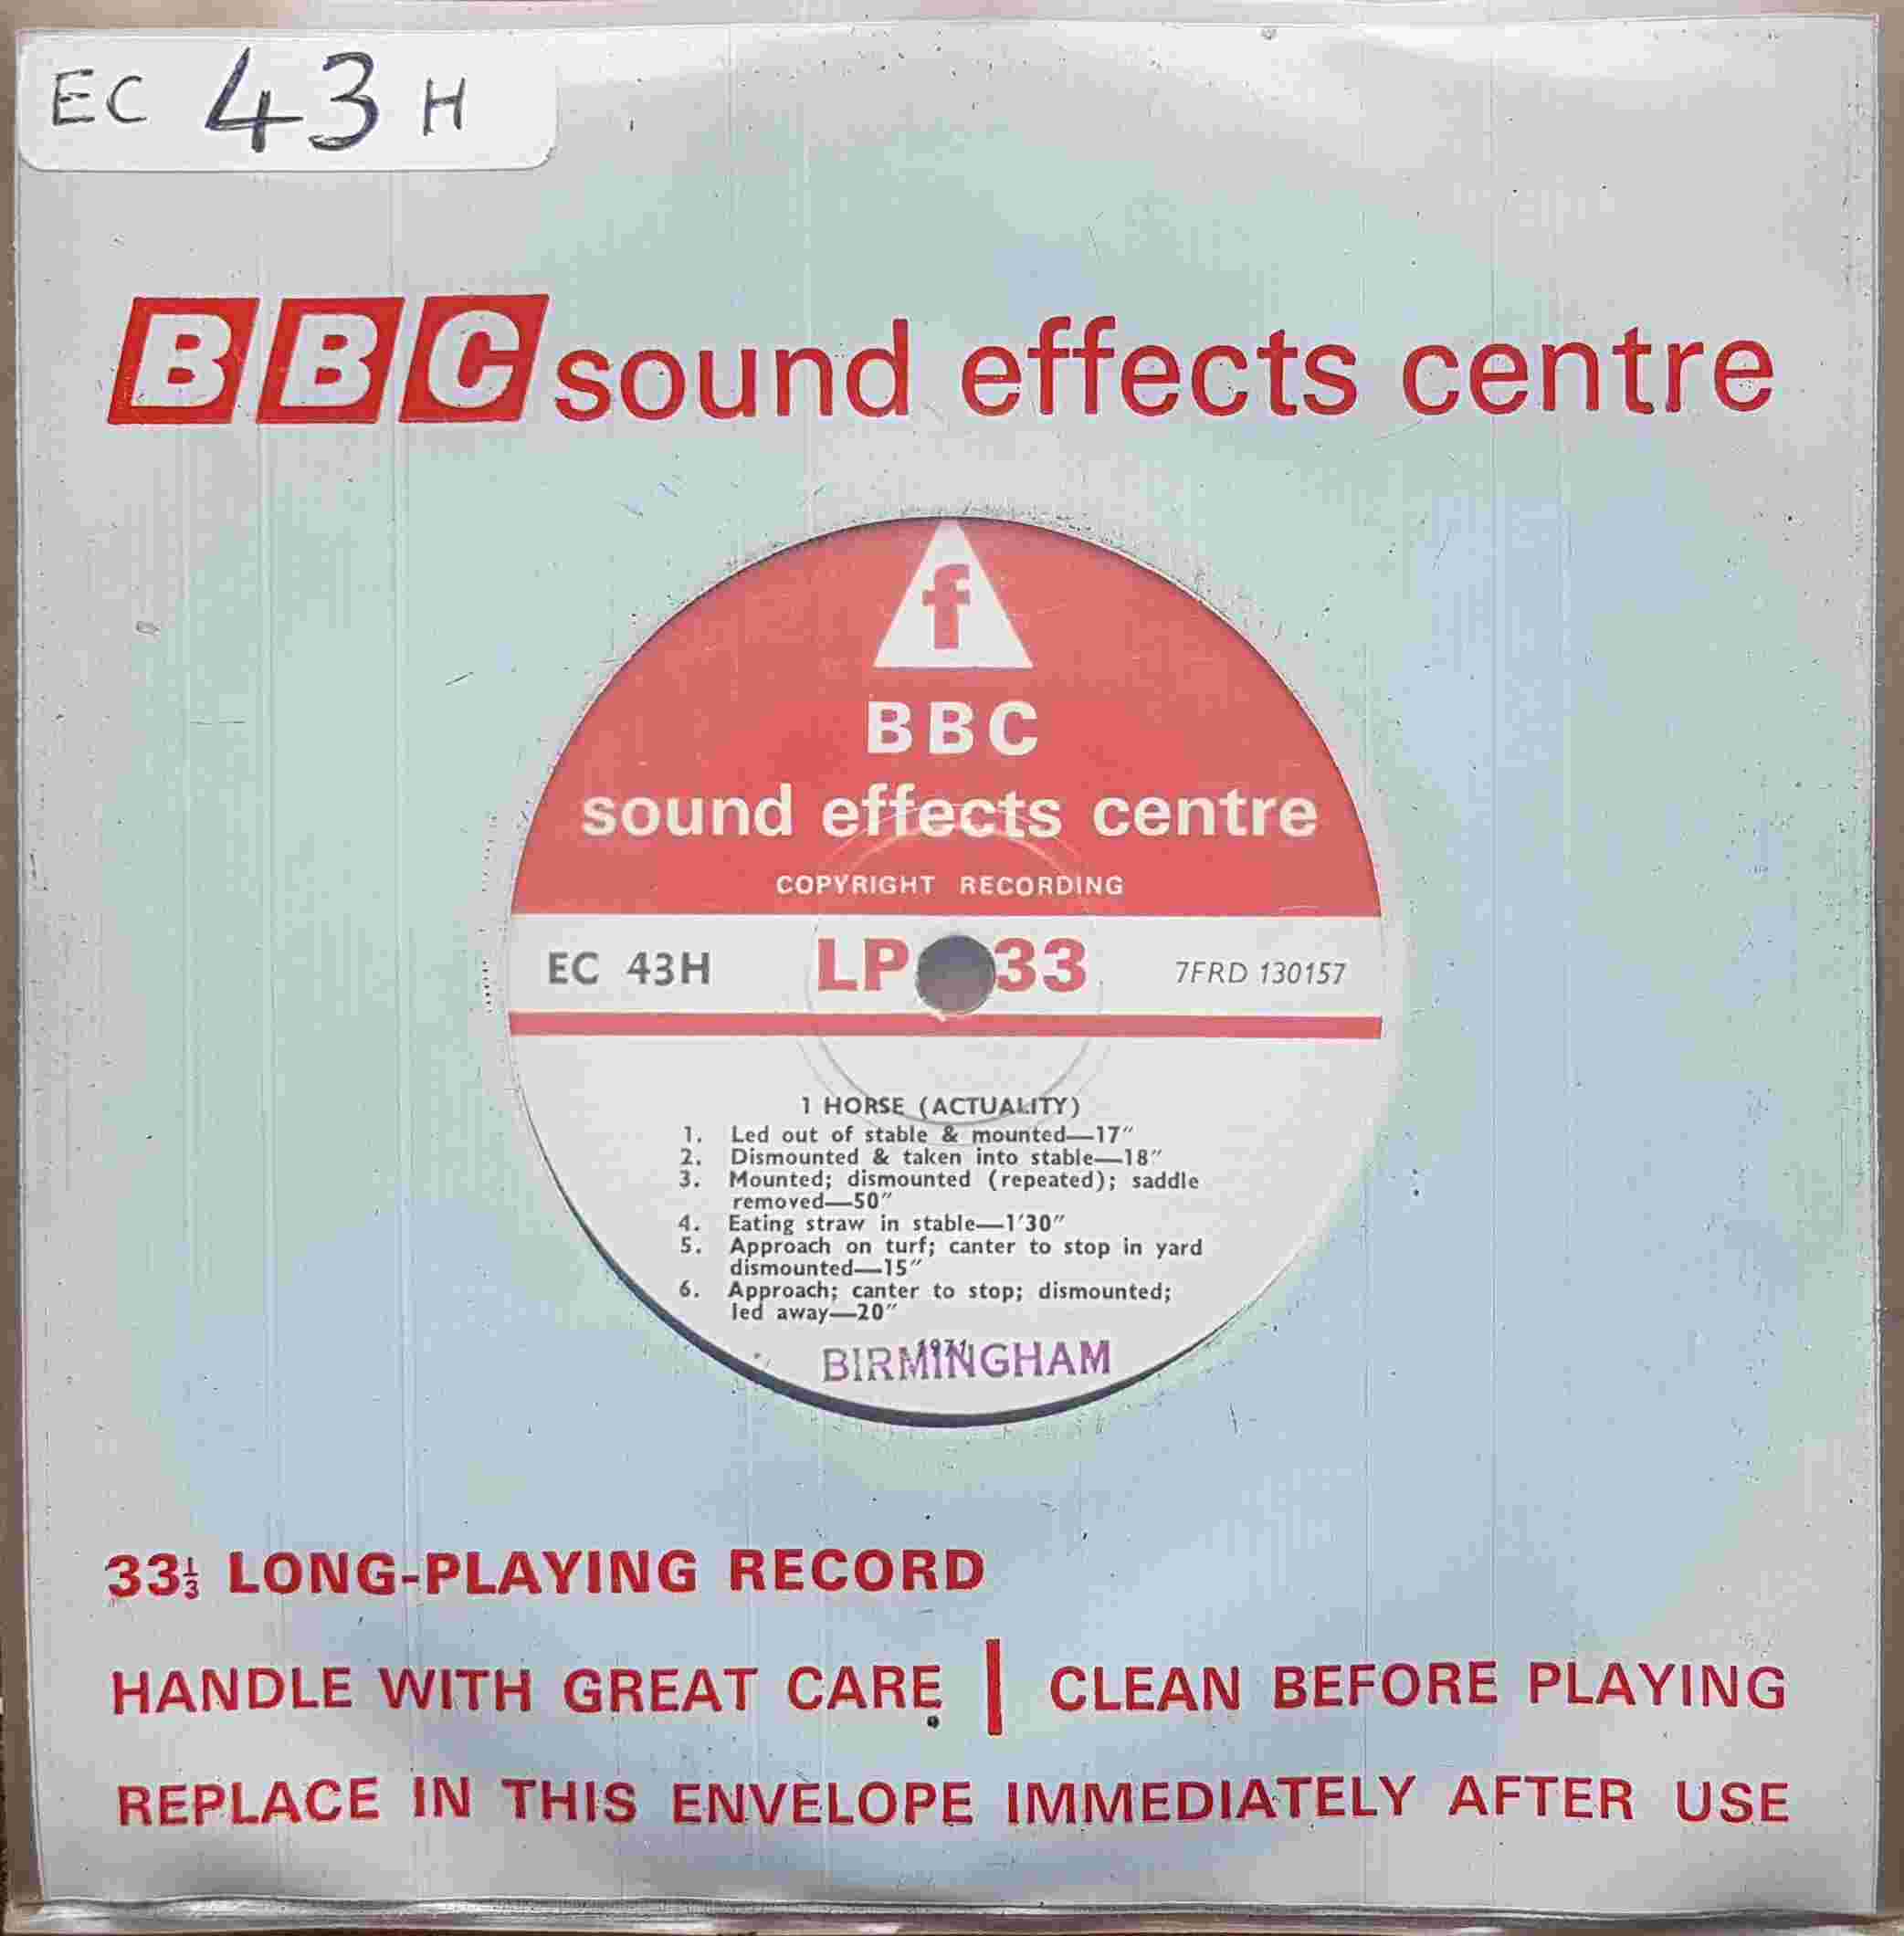 Picture of EC 43H Horses (Actuality) by artist Not registered from the BBC singles - Records and Tapes library